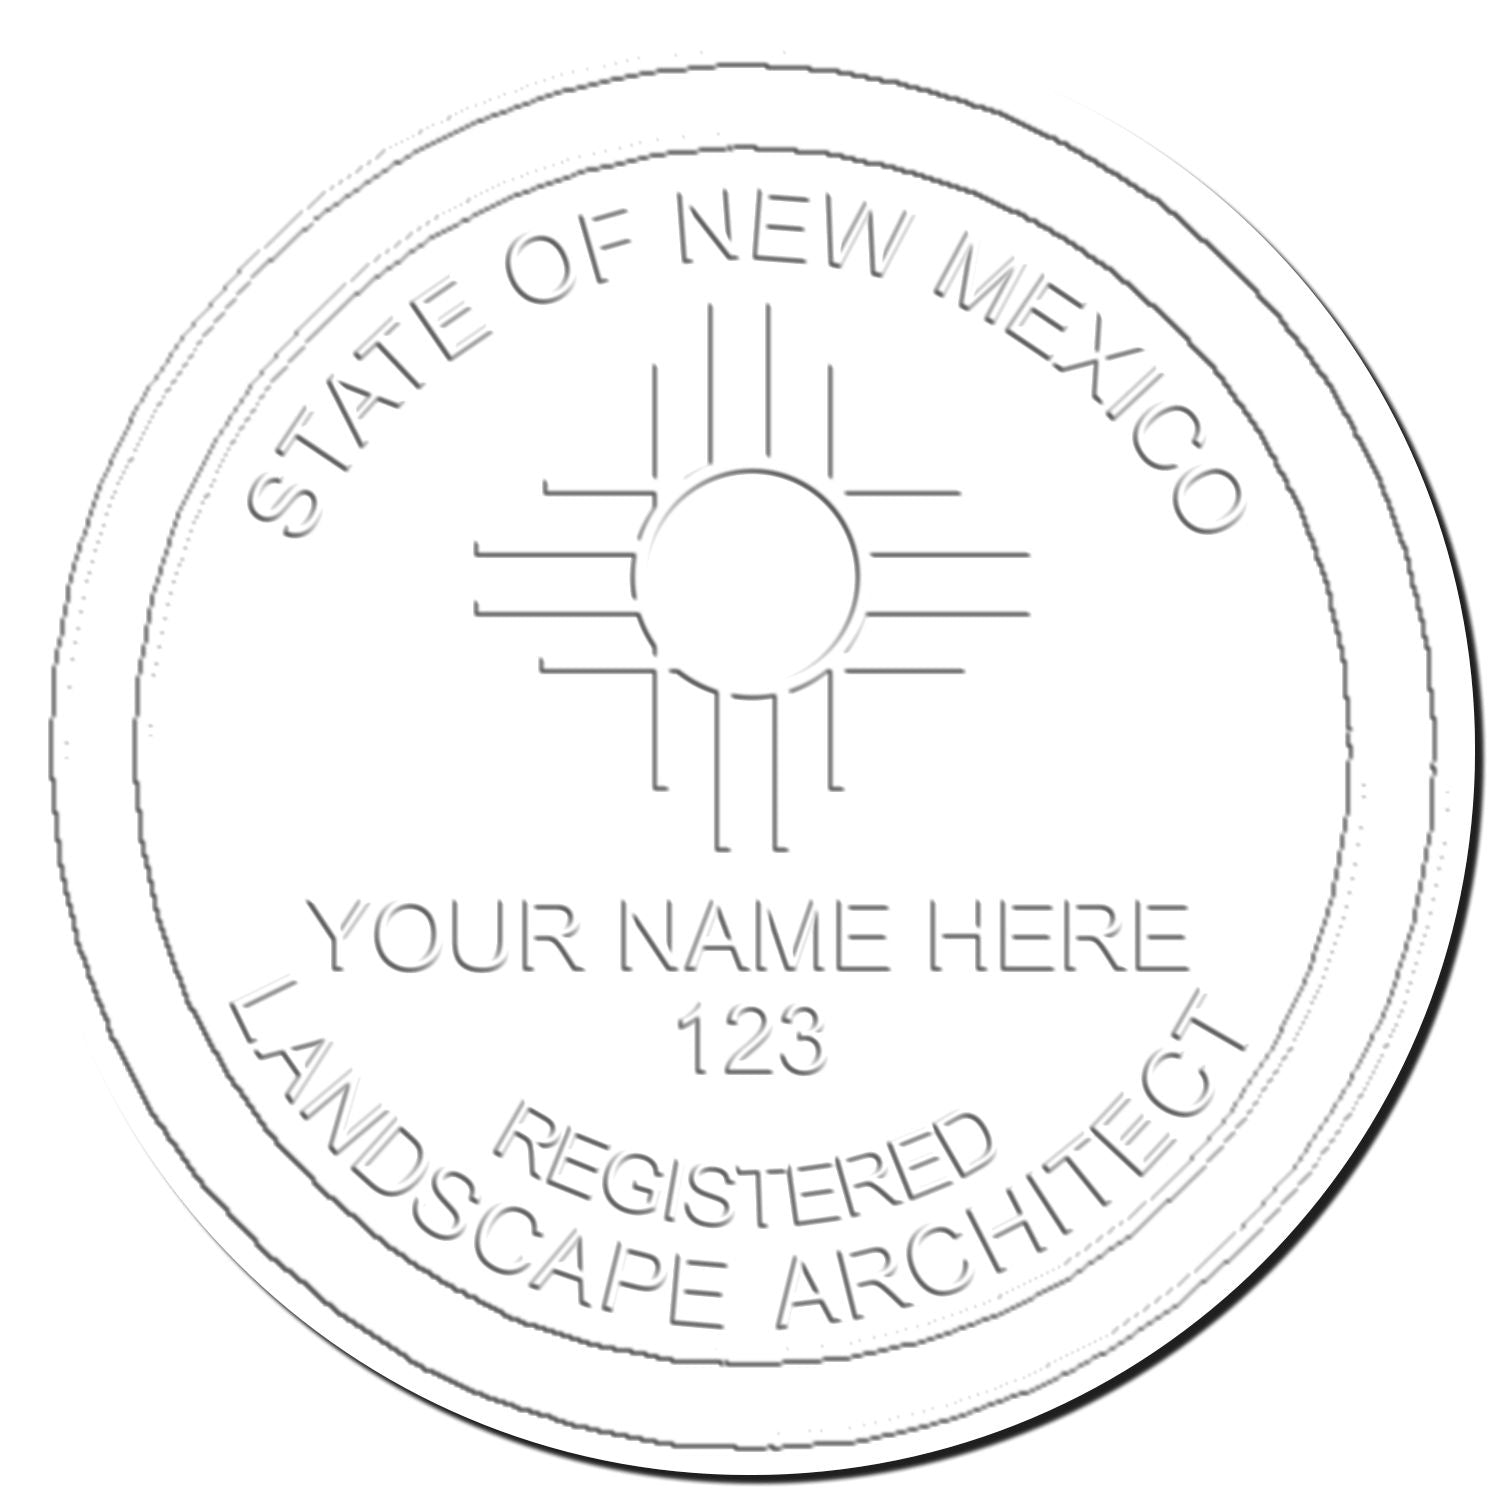 This paper is stamped with a sample imprint of the New Mexico Long Reach Landscape Architect Embossing Stamp, signifying its quality and reliability.